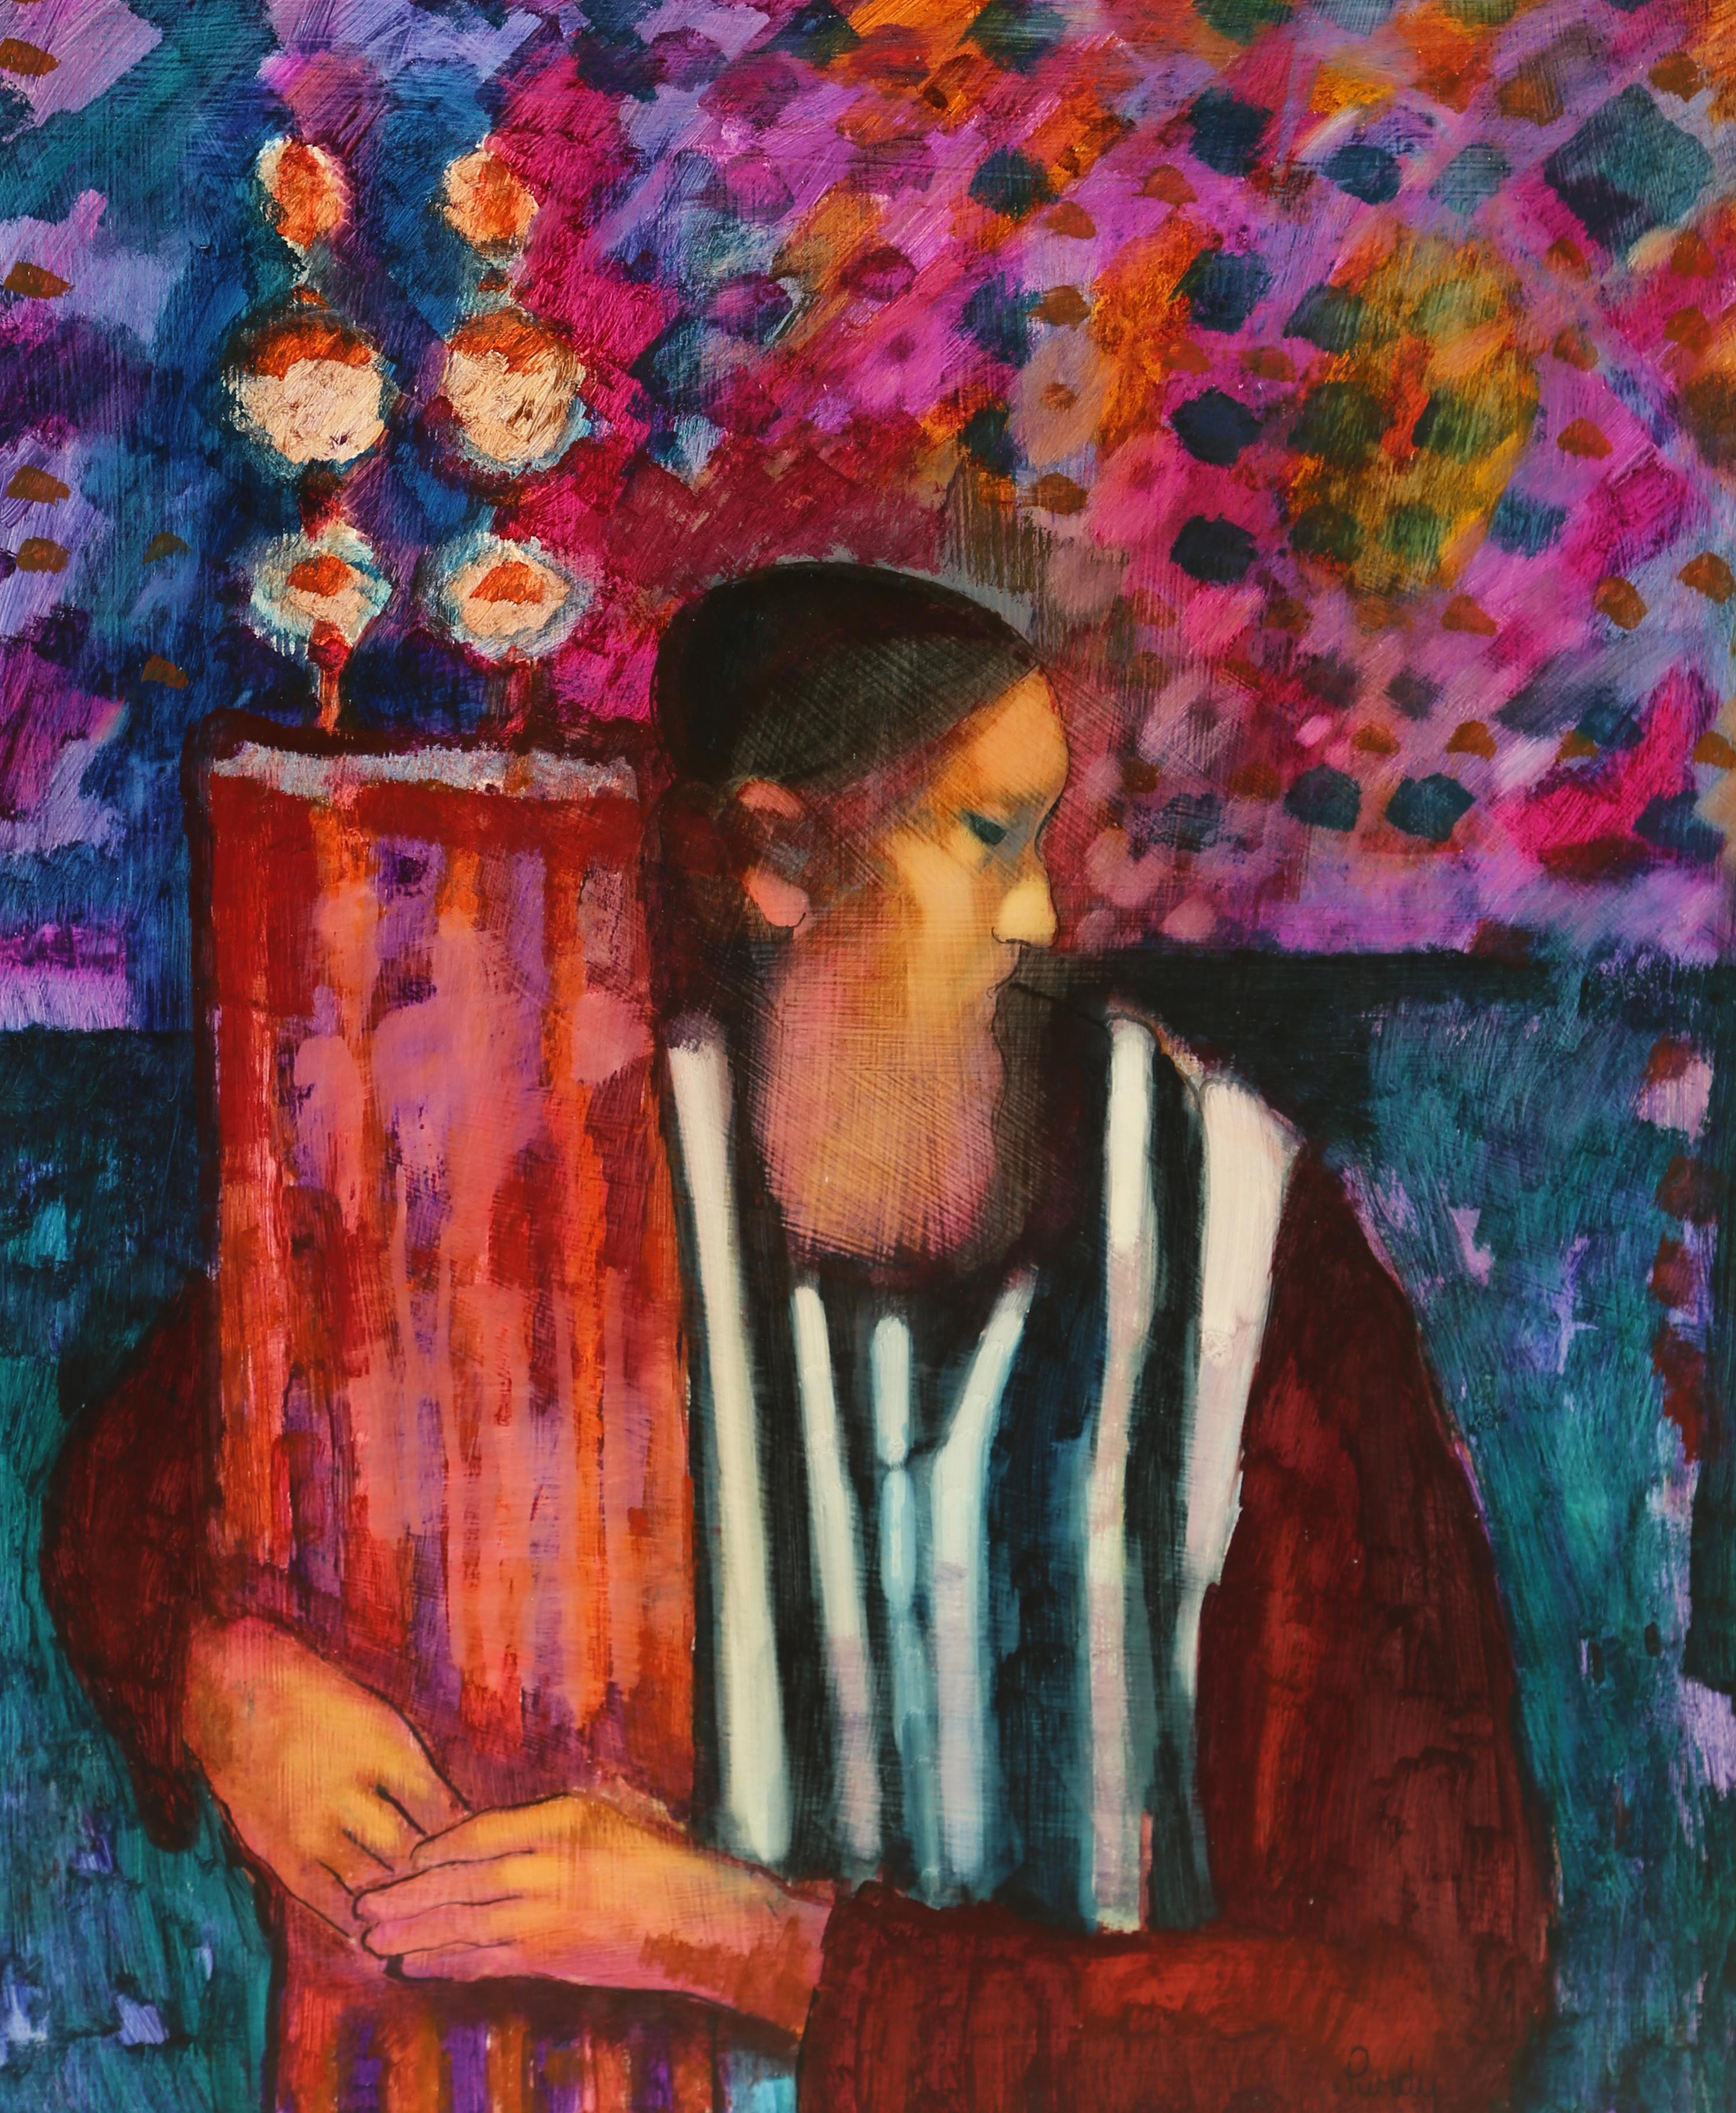 Artist: Donald Roy Purdy, American (1924 - )
Title: Rabbi with Torah
Year: circa 1970
Medium: Oil on Masonite, signed l.r.
Size: 30 x 22.5 in. (76.2 x 57.15 cm)
Frame Size: 38 x 31 inches
